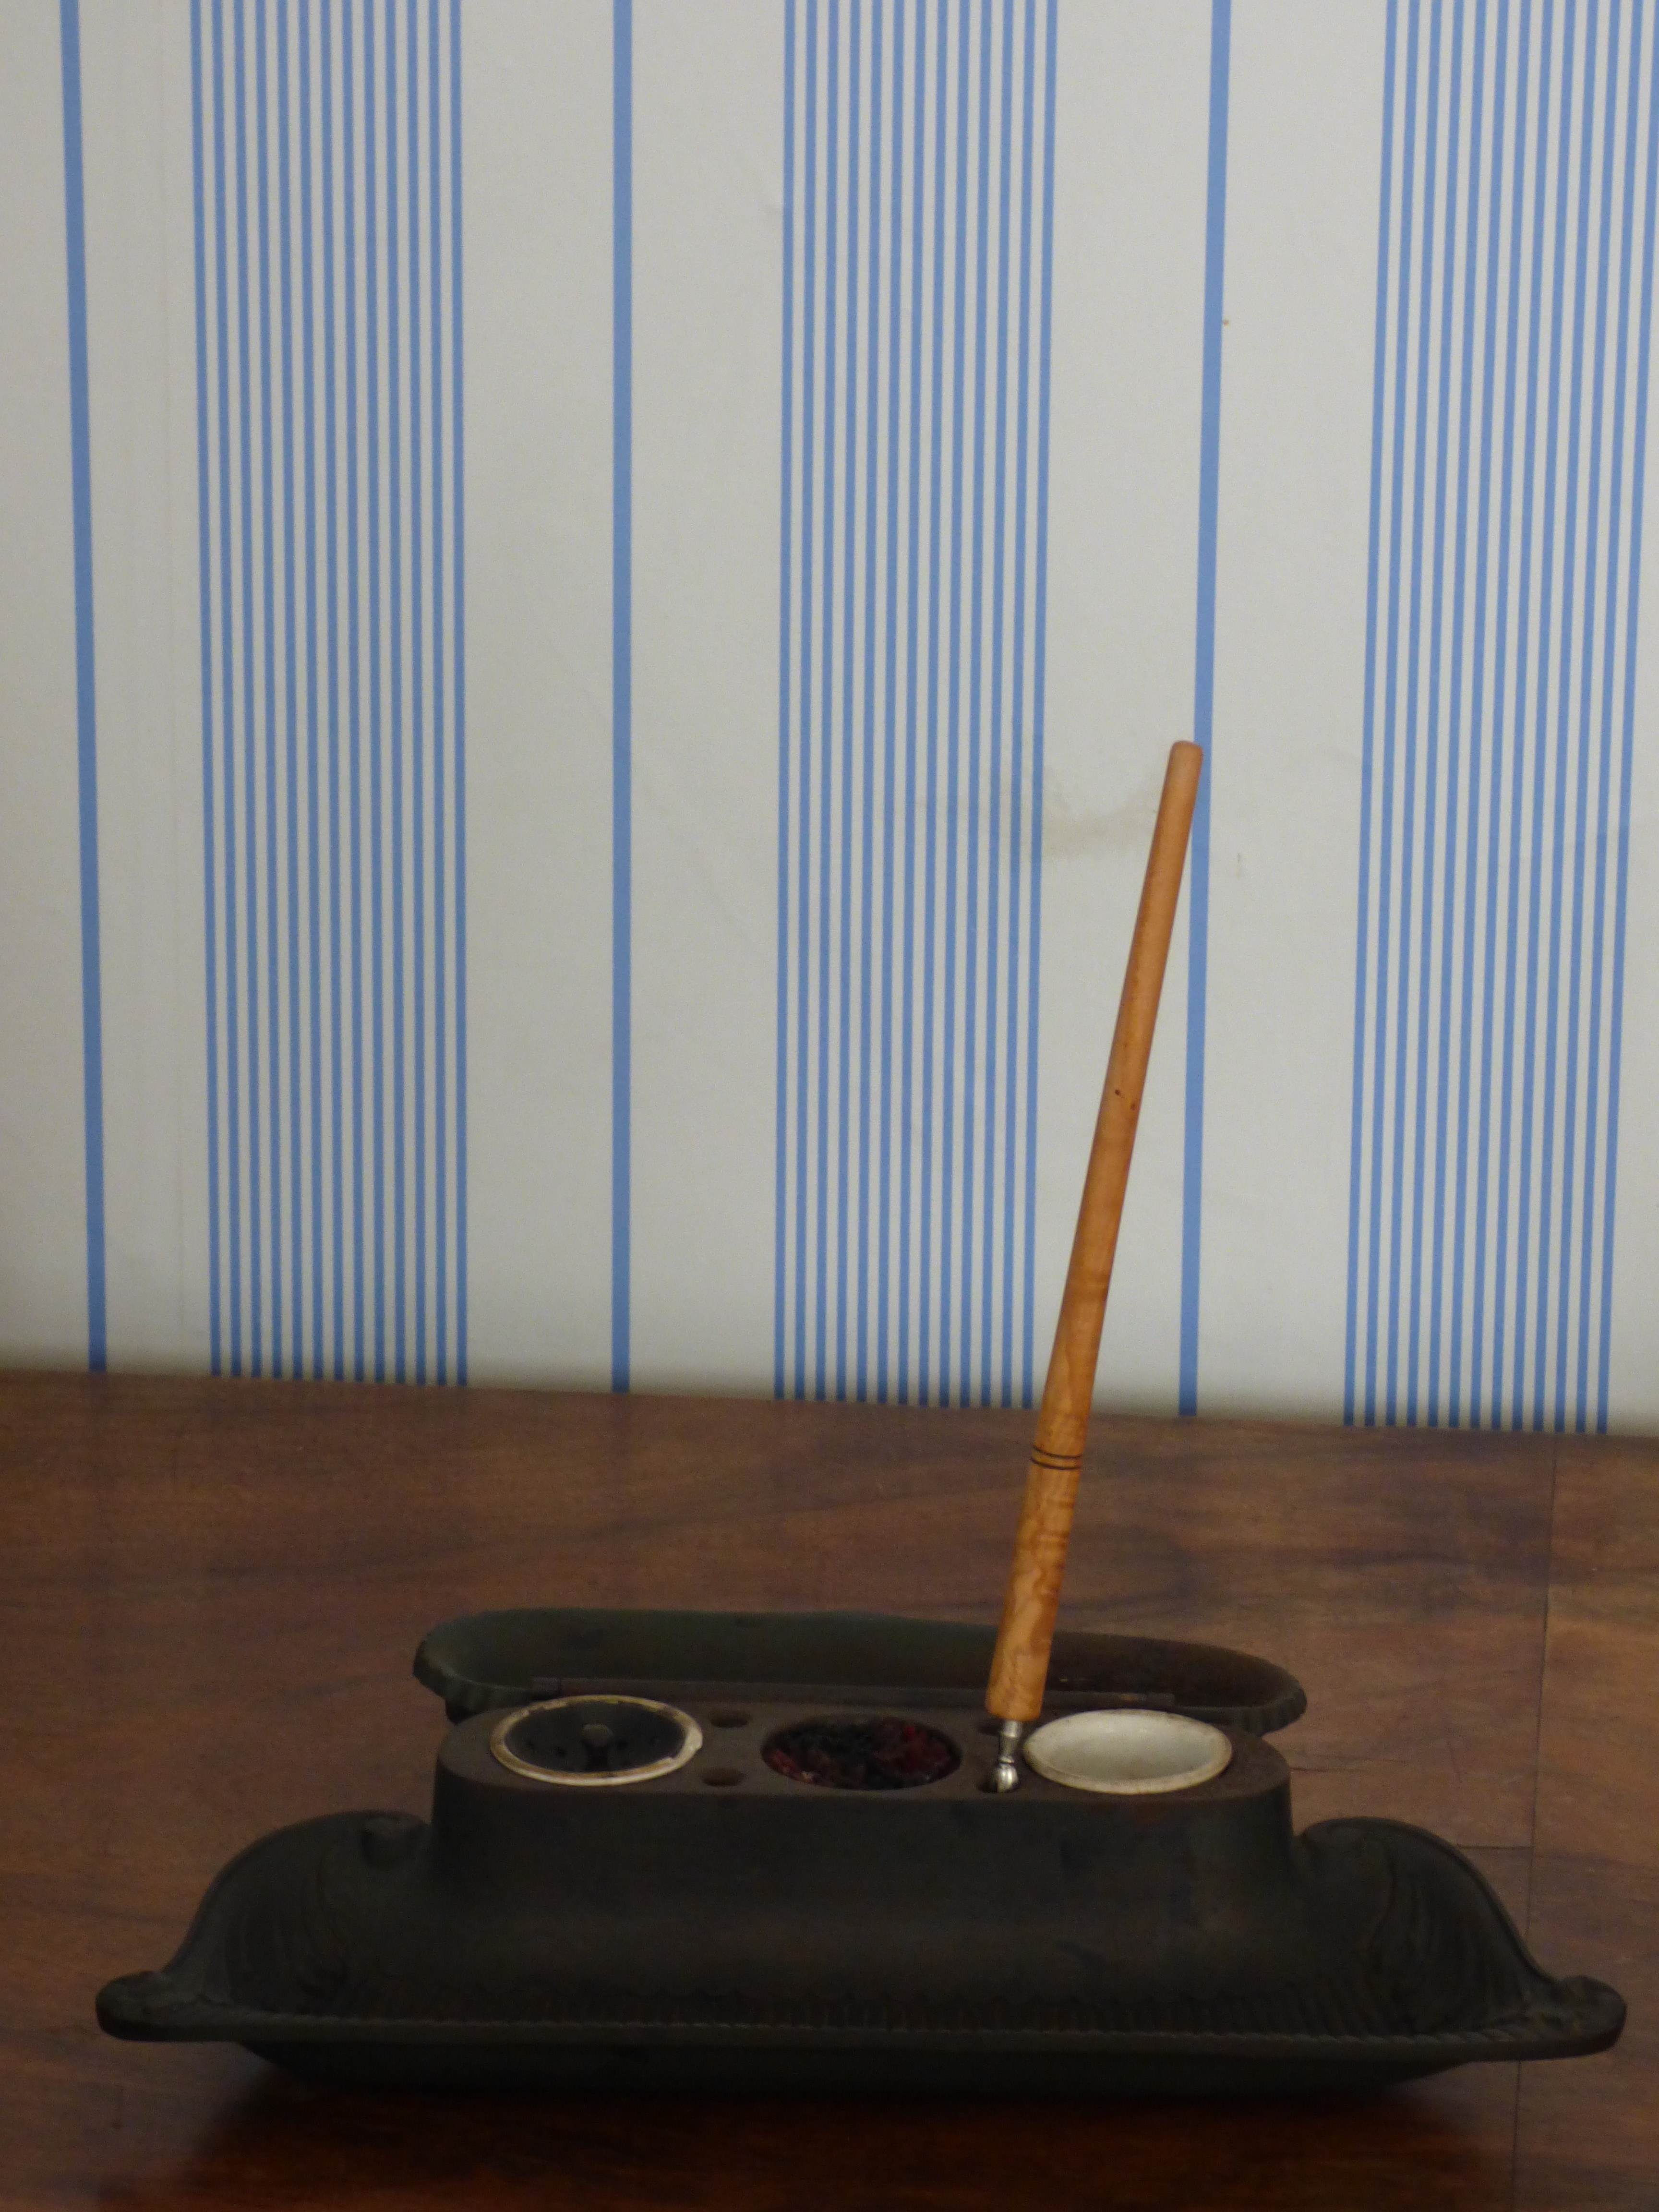 brown stick on black container